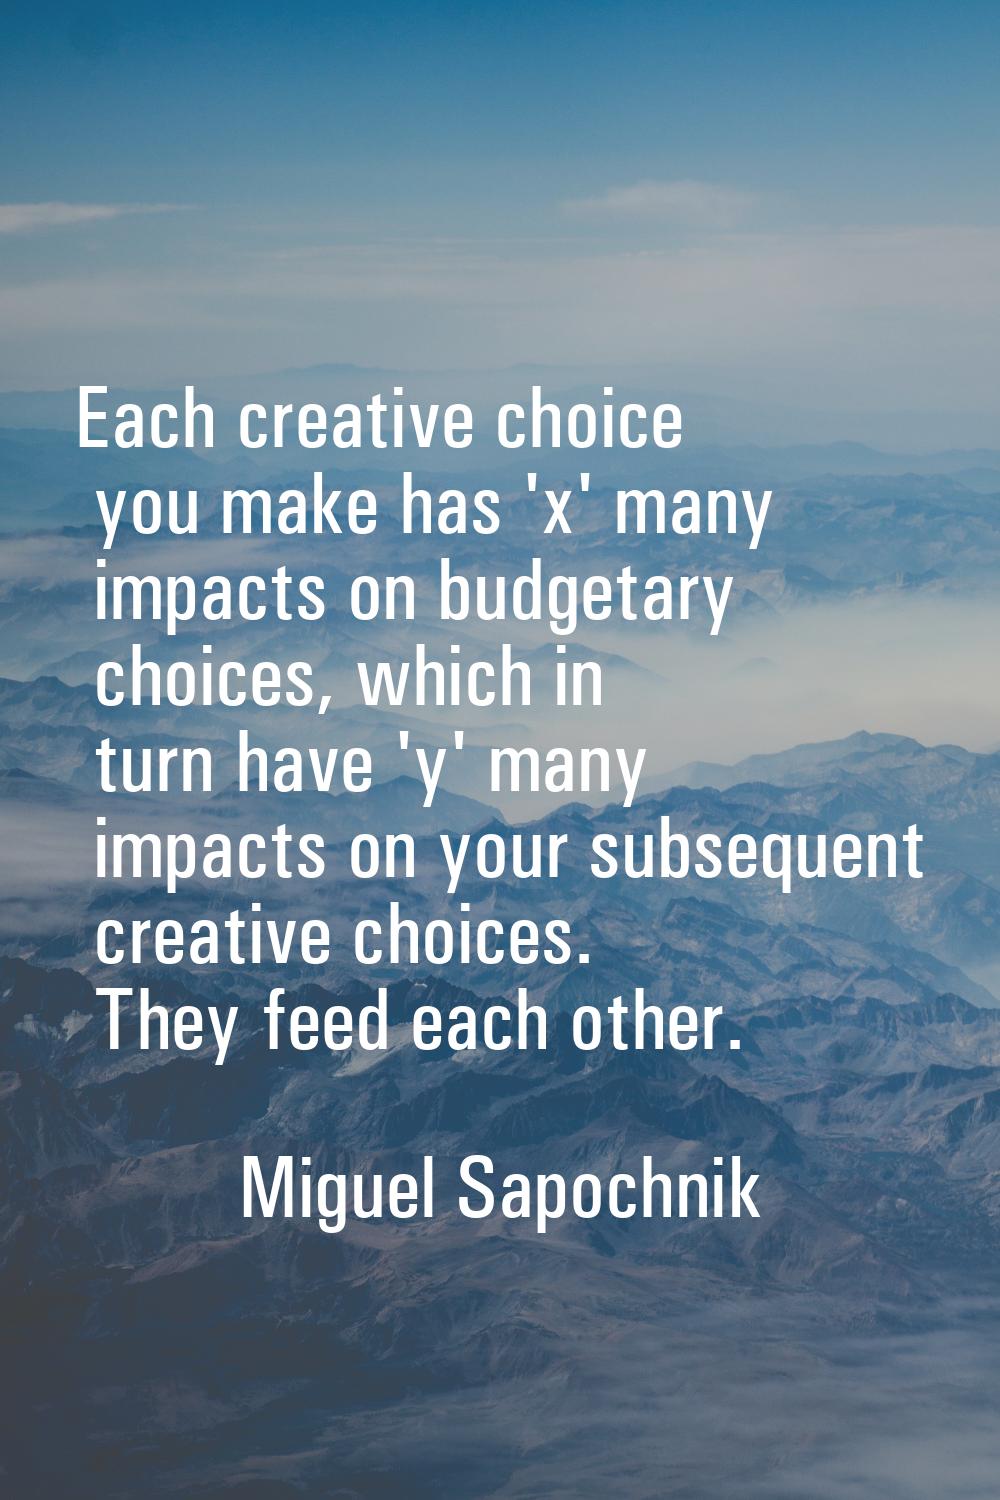 Each creative choice you make has 'x' many impacts on budgetary choices, which in turn have 'y' man